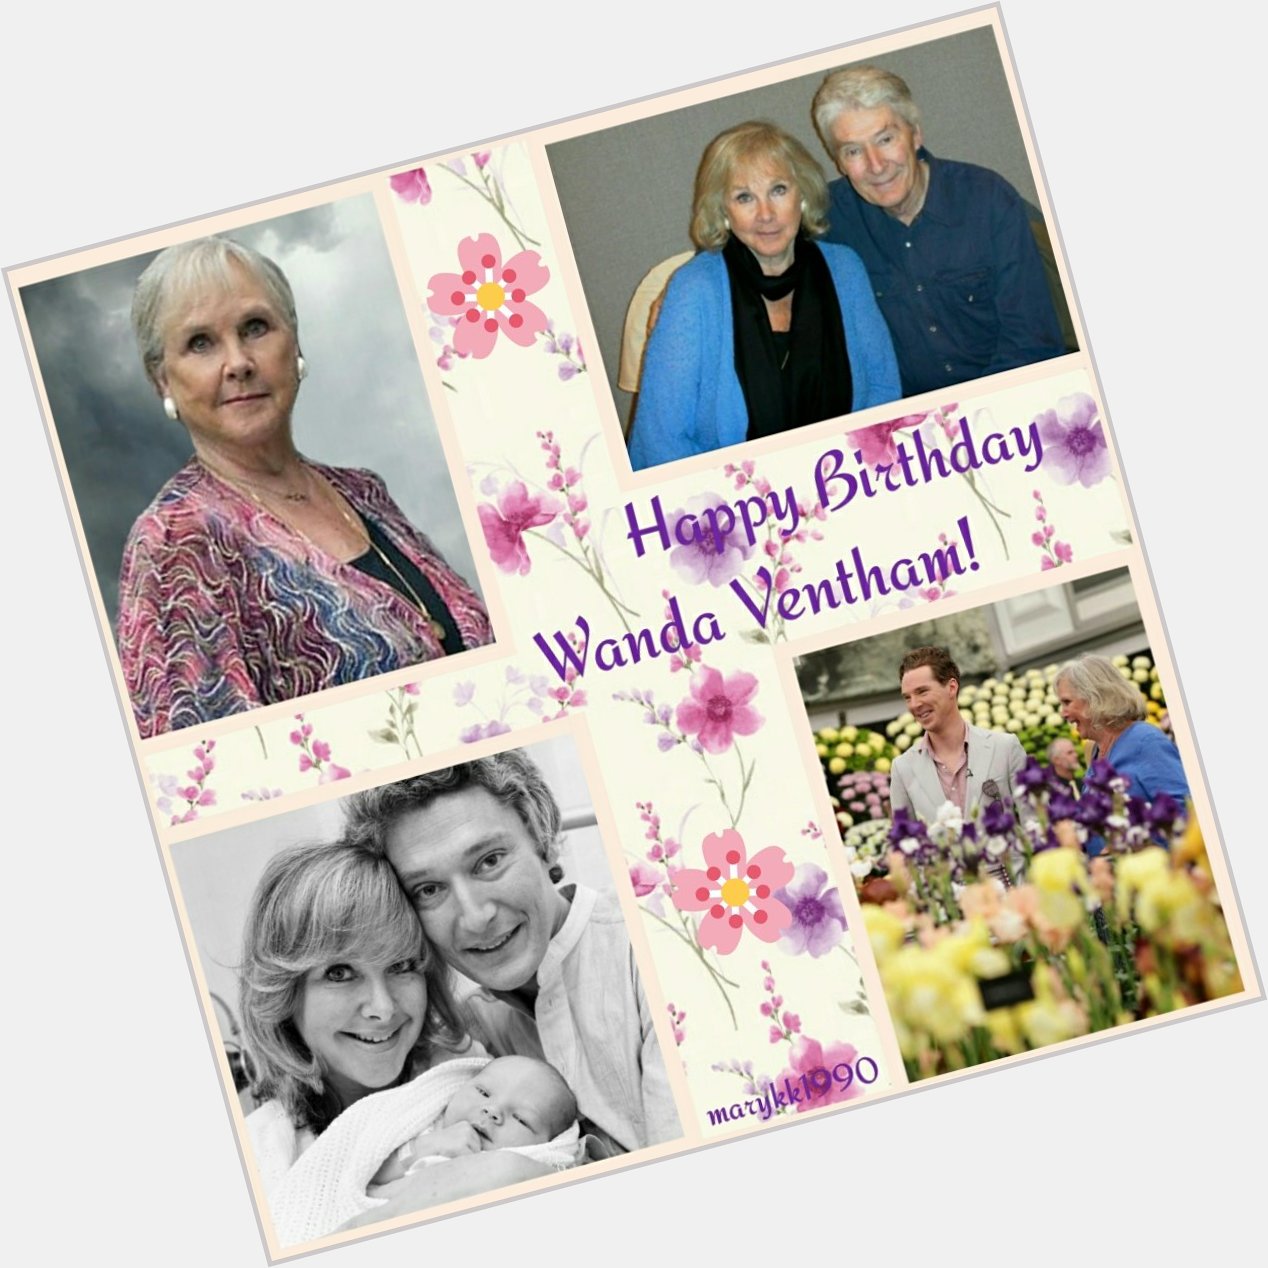 Wishing Happy Birthday to Wanda Ventham! I hope you have a perfect and lovely day with your beautiful family.    